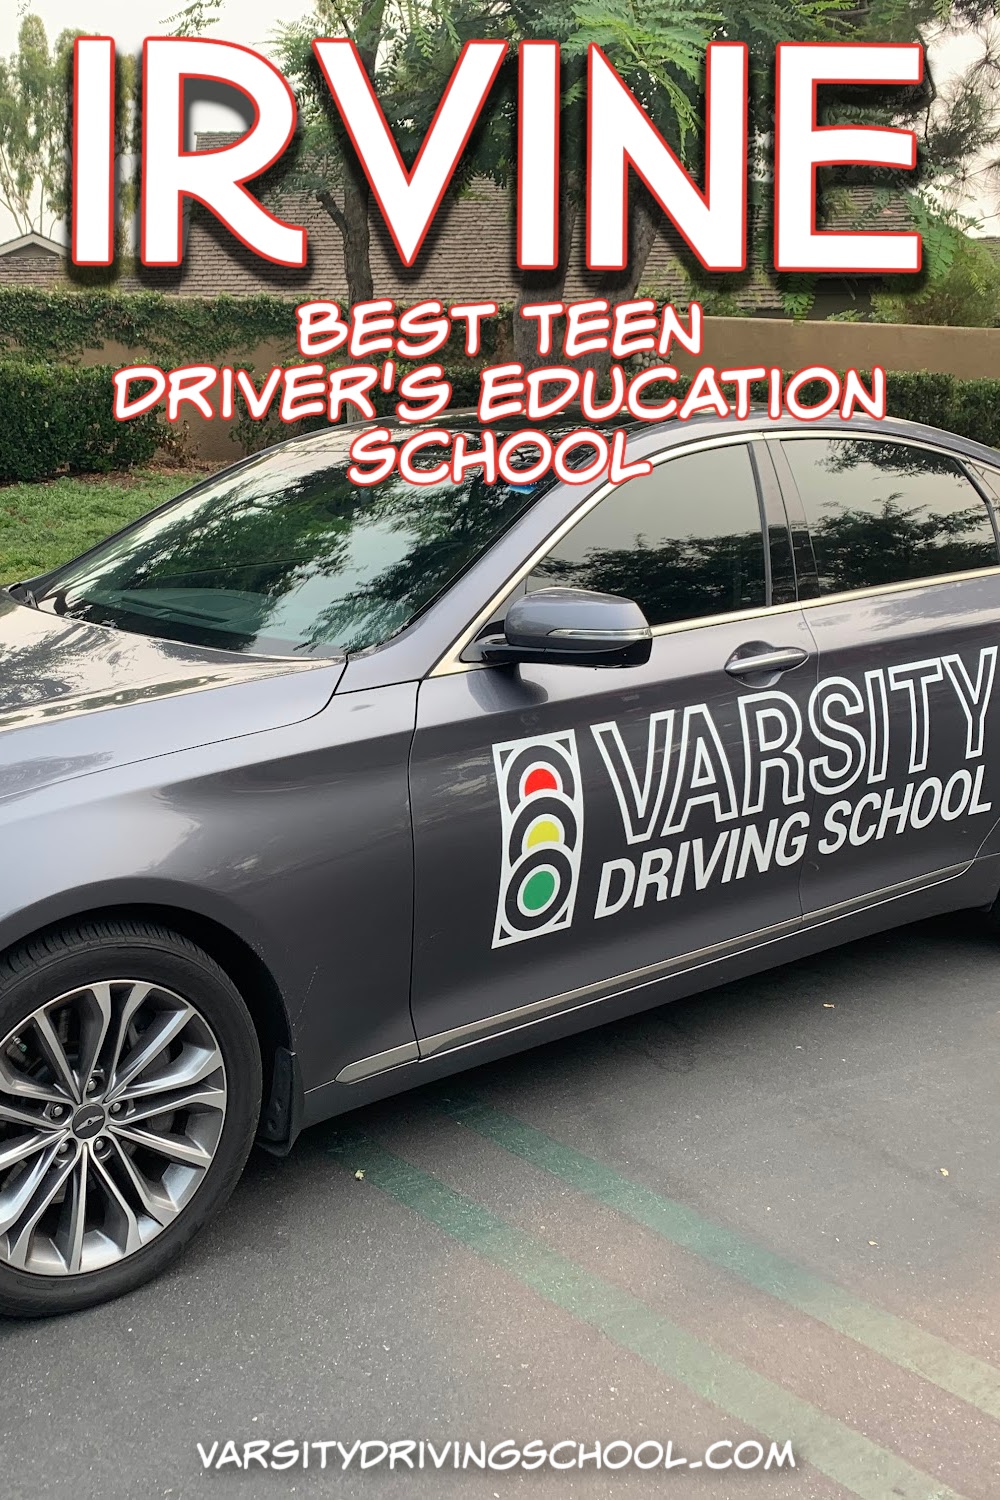 Varsity Driving School is the best teen drivers education school in Irvine for students to learn how to drive defensively.